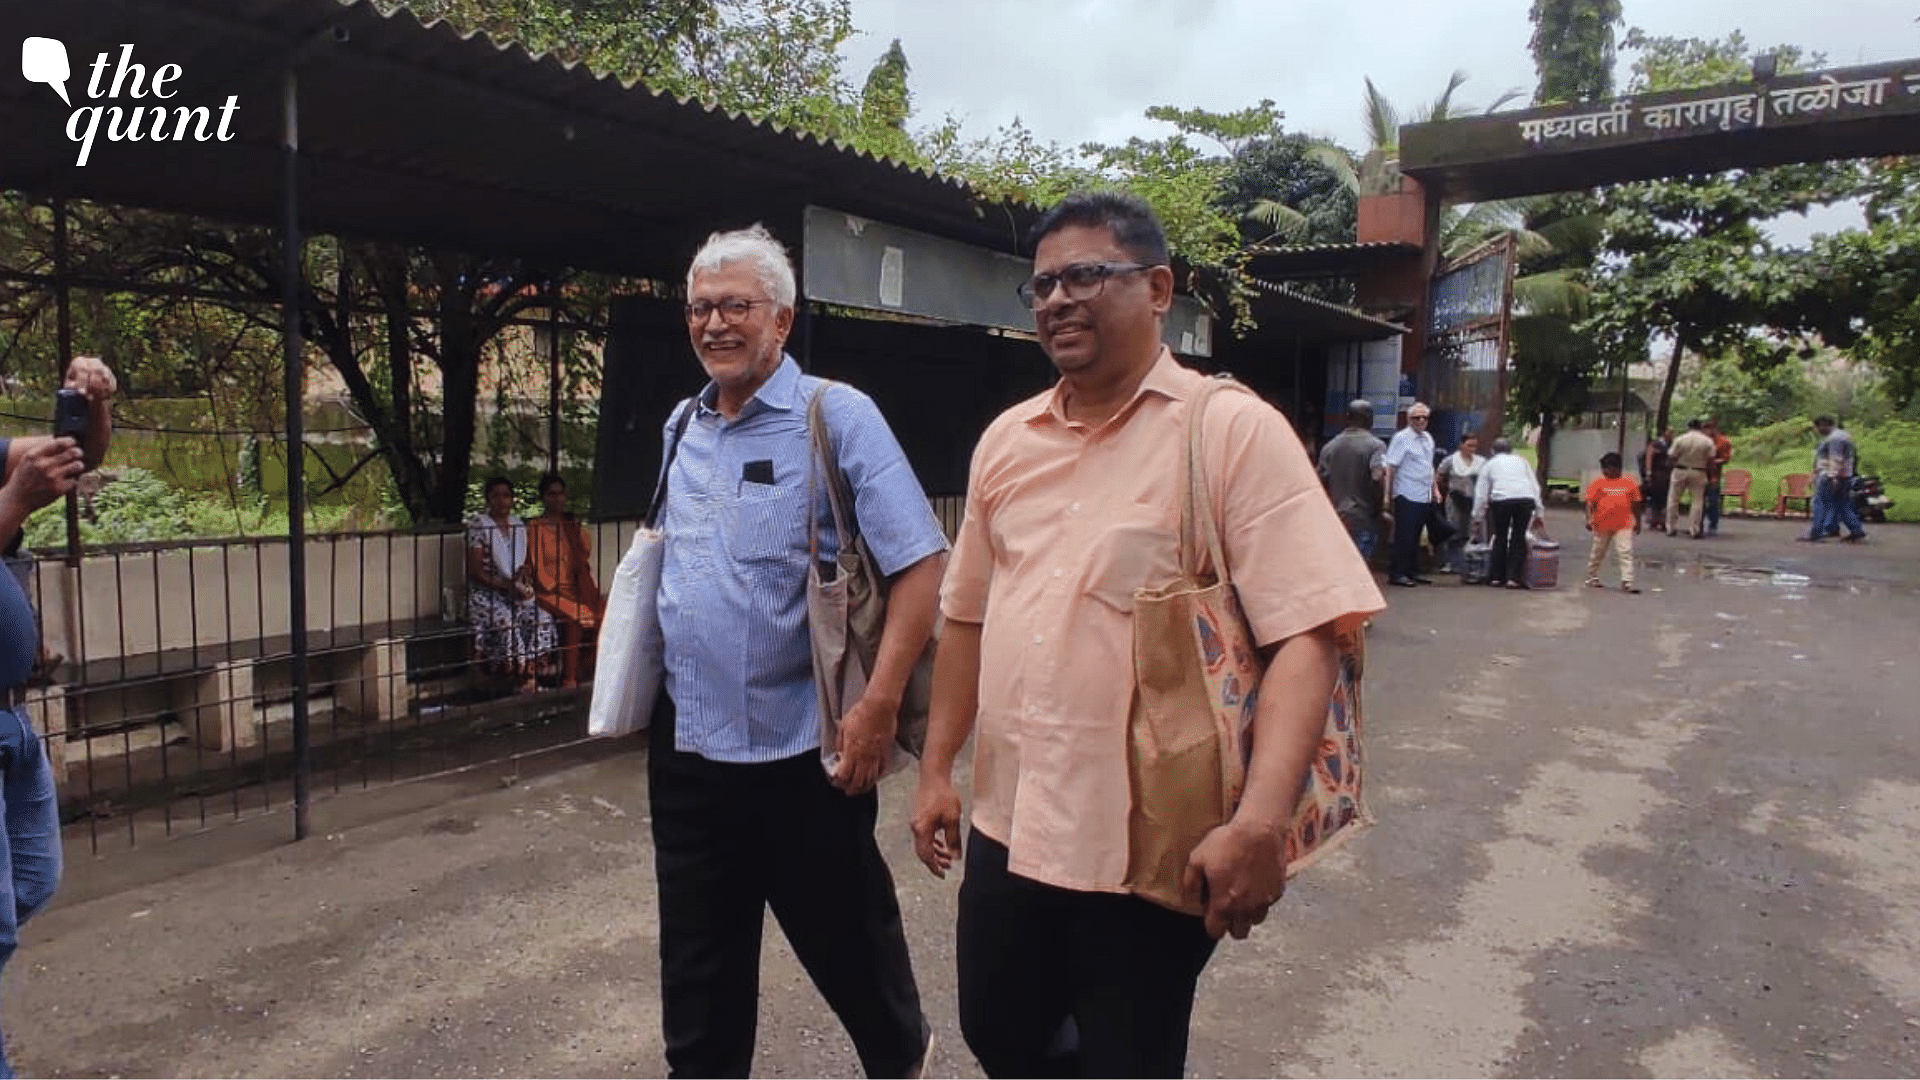 <div class="paragraphs"><p>Both Vernon Gonsalves and Arun Ferreria were custody since August 2018 for their alleged involvement in offences under the Unlawful Activities (Prevention) Act, 1967.</p></div>